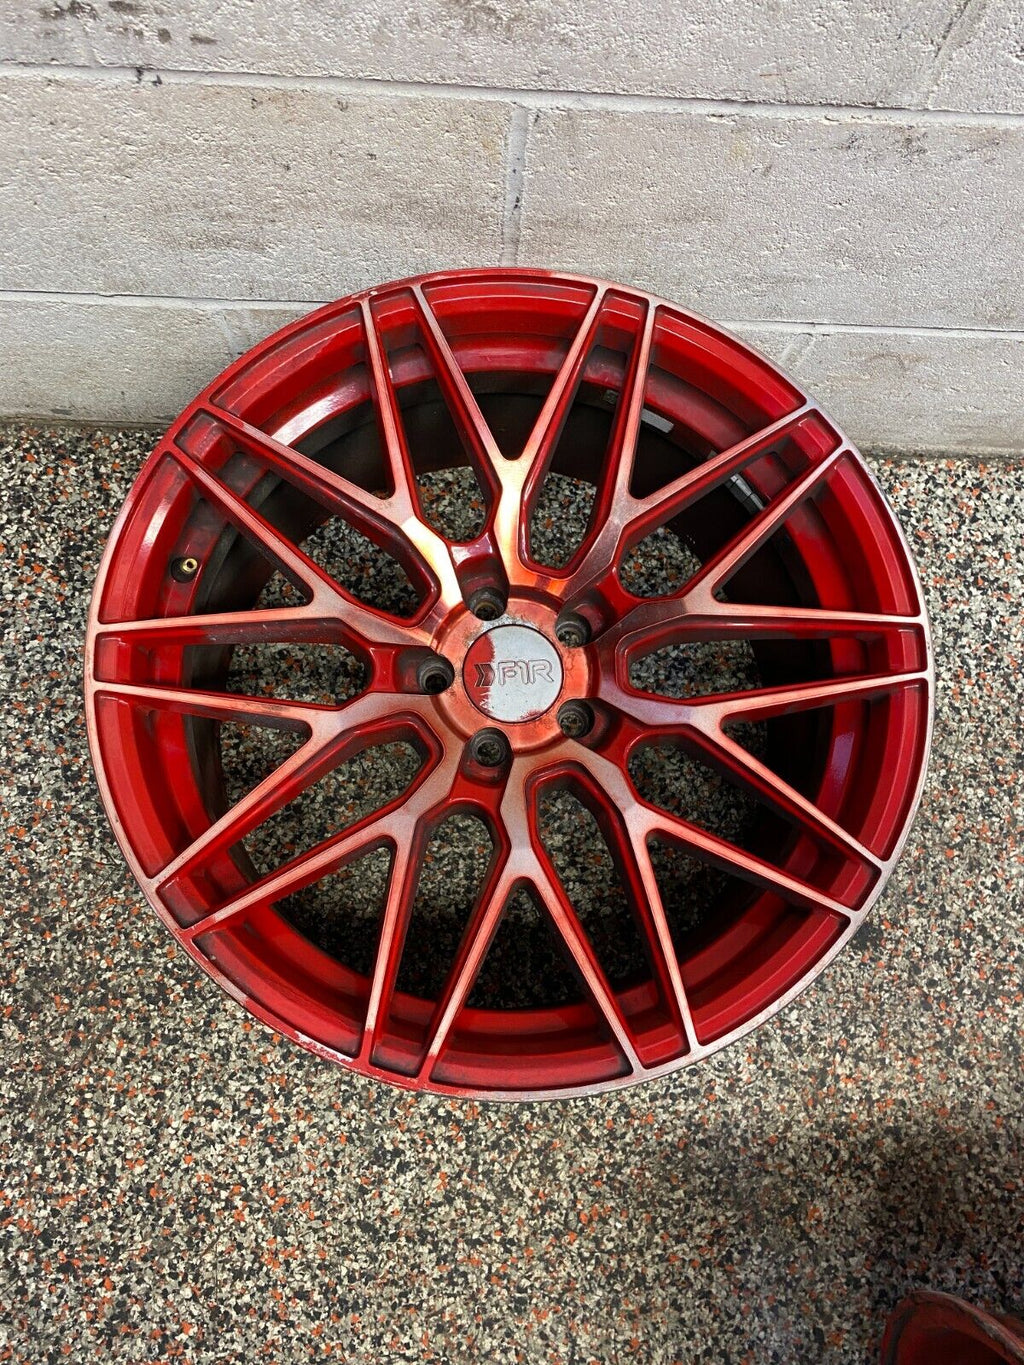 2010 CAMARO SS F1R WHEELS F103 CANDY RED 18x9.5  SET OF 4 USED